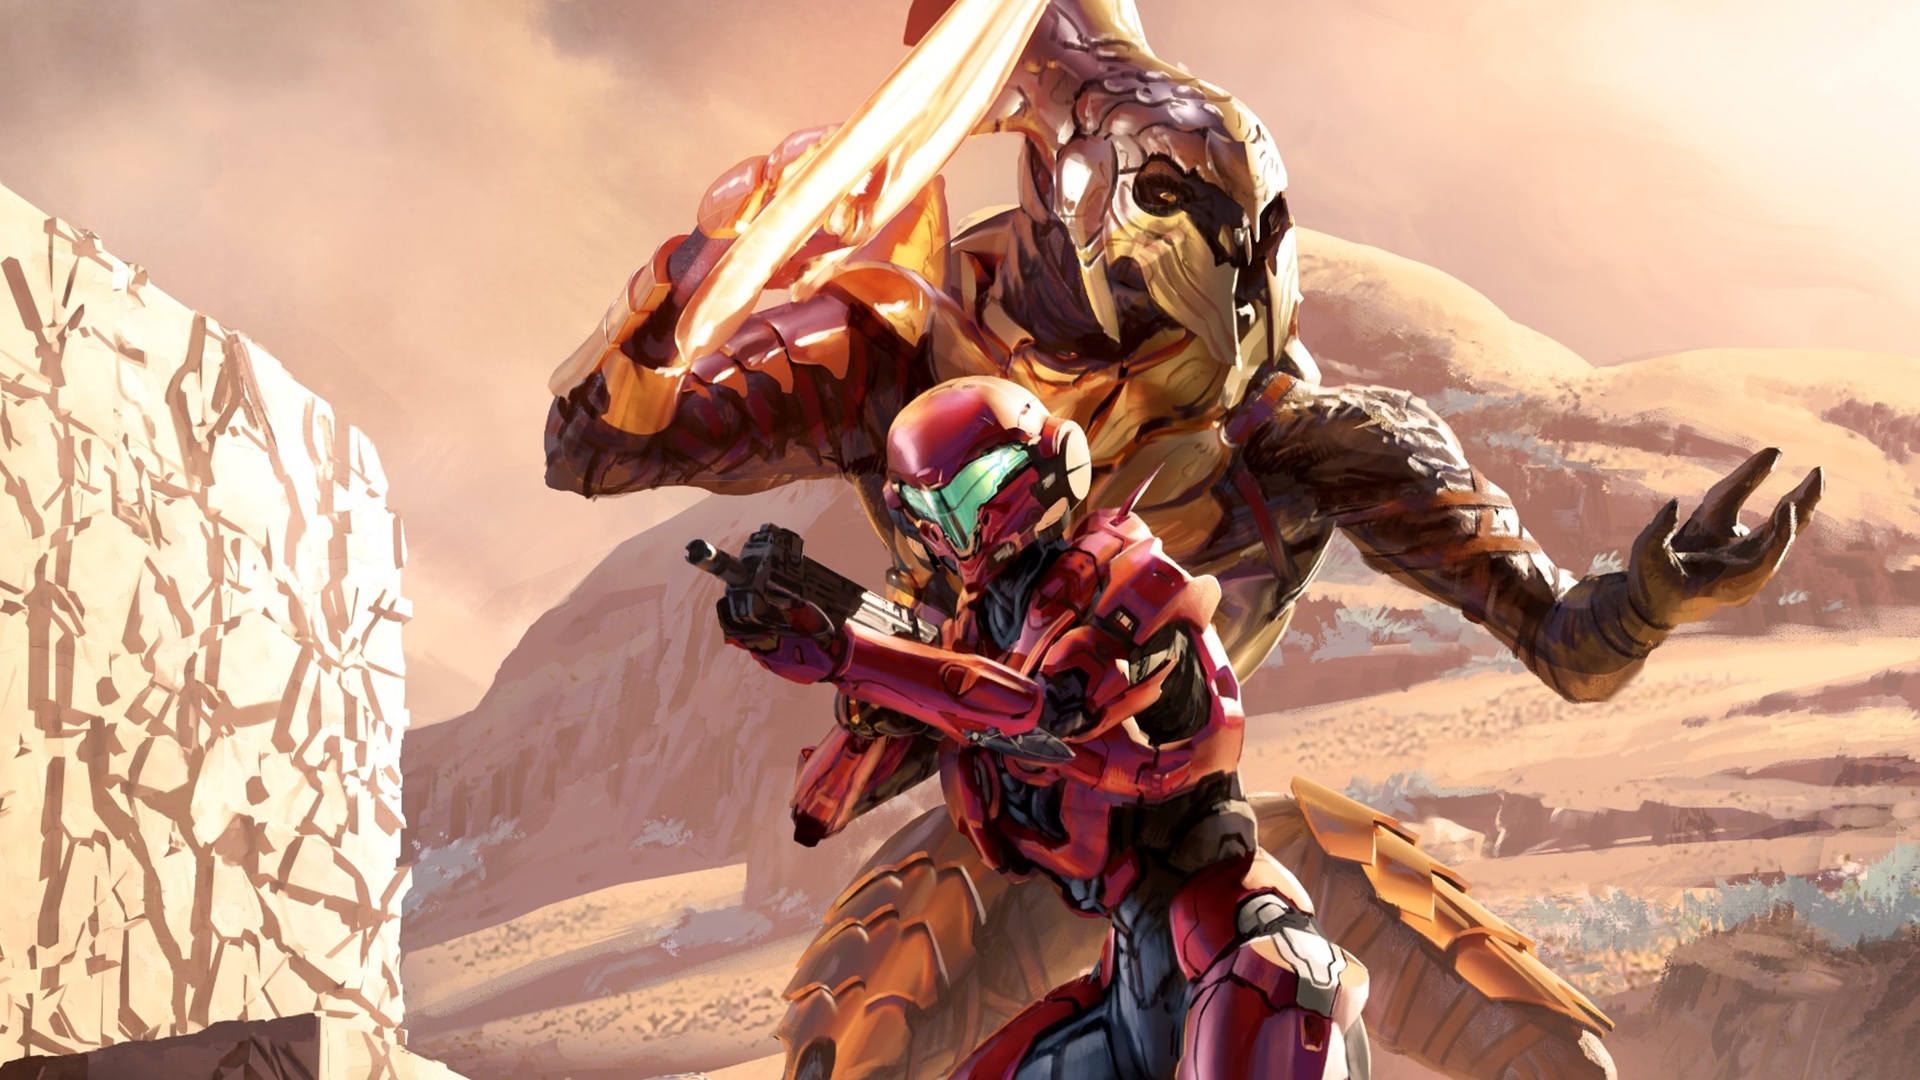 Halo: Outcasts cover art crop showing Arbiter Thel 'Vadam and Spartan Vale